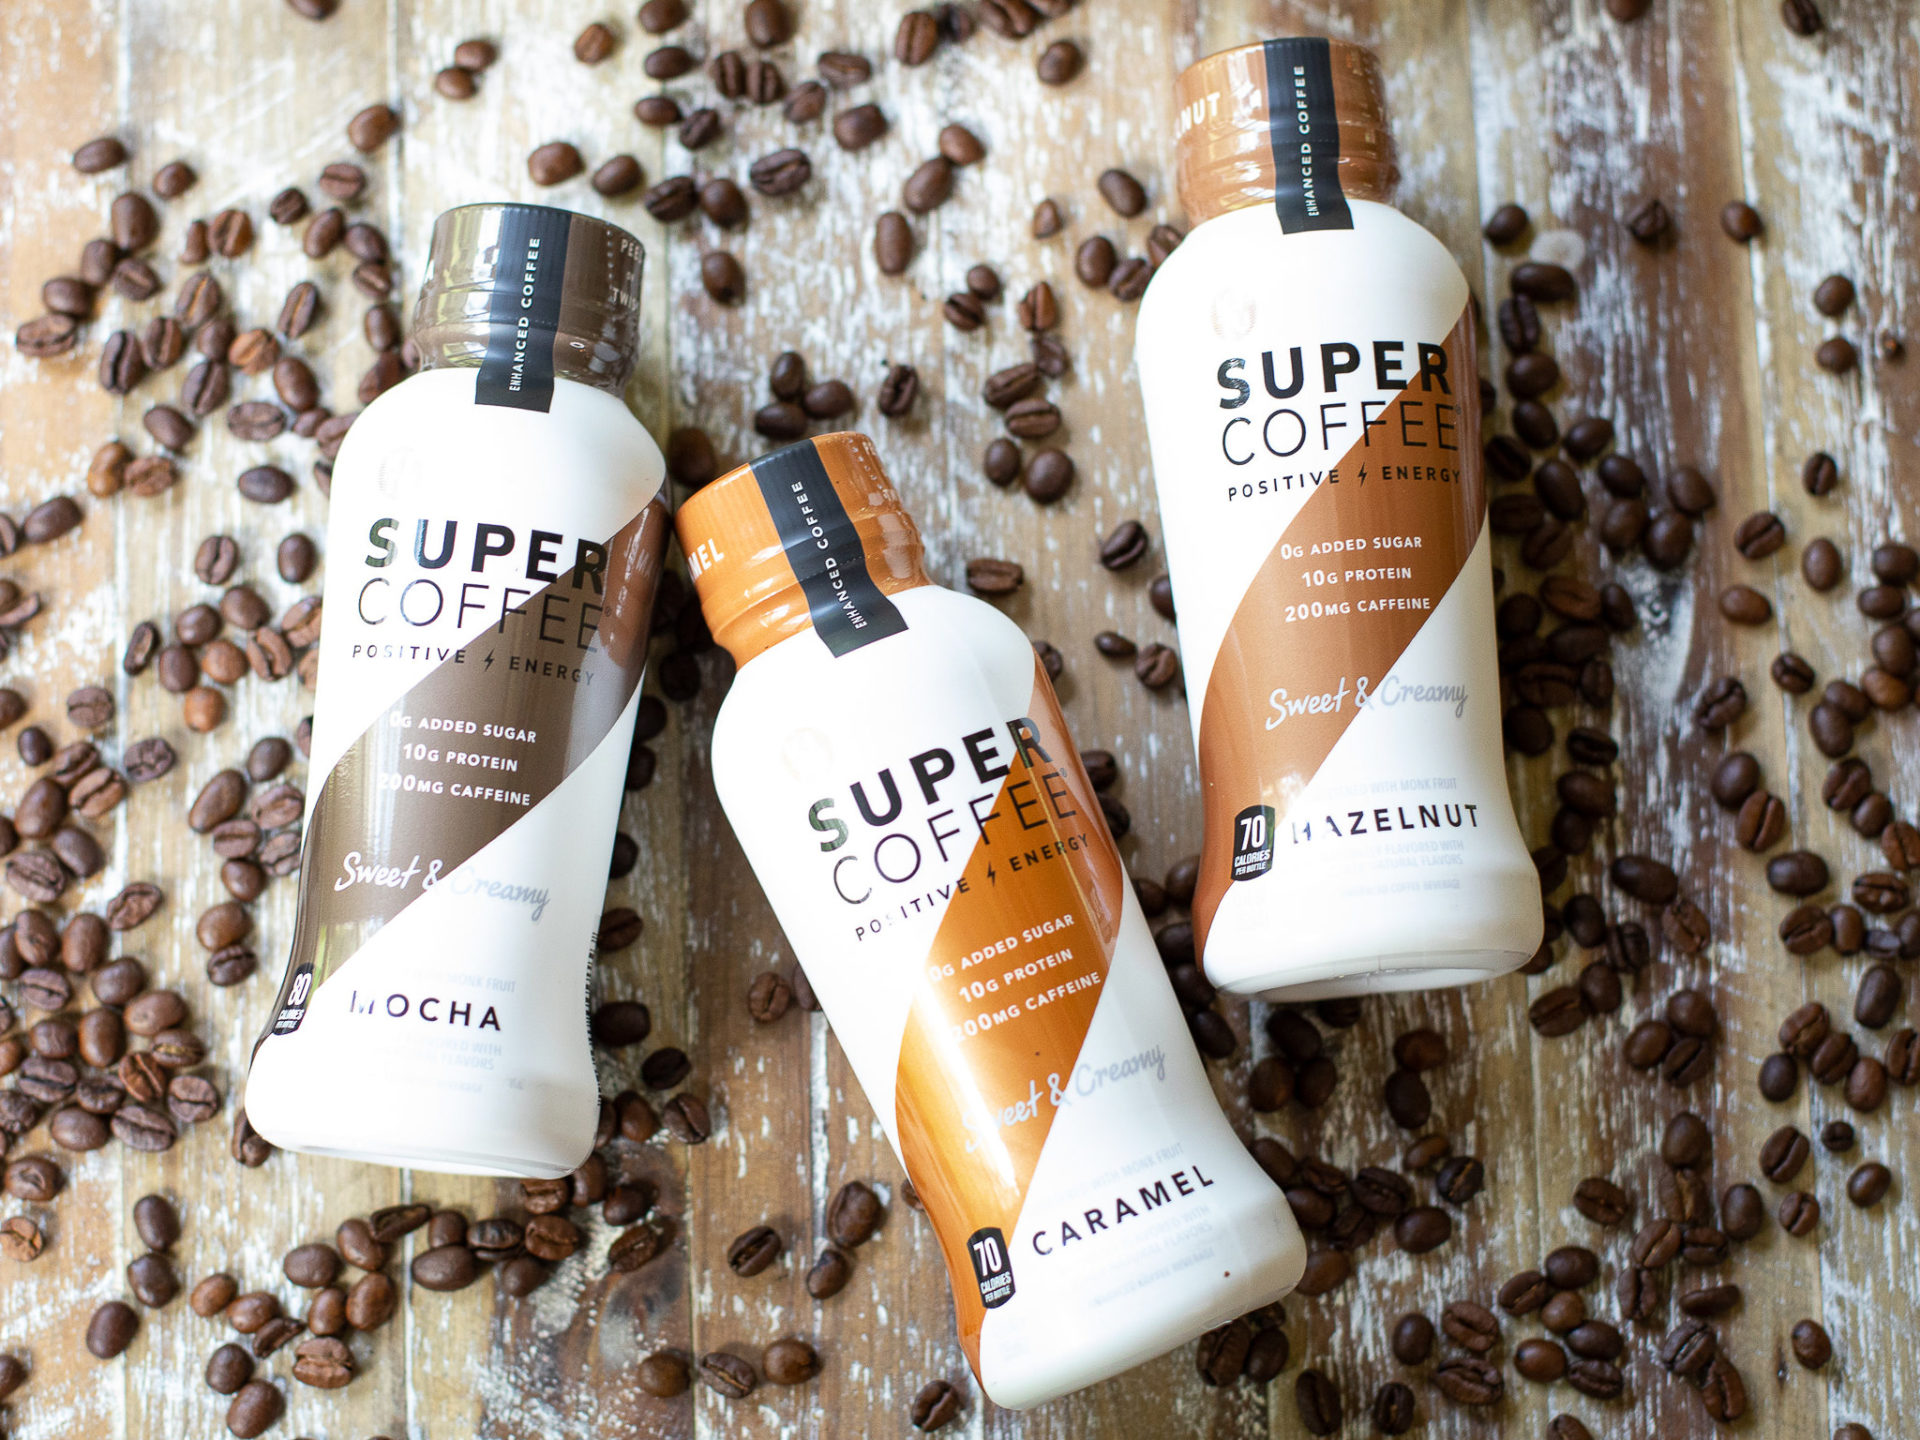 Grab Super Coffee For Just $1.49 At Kroger